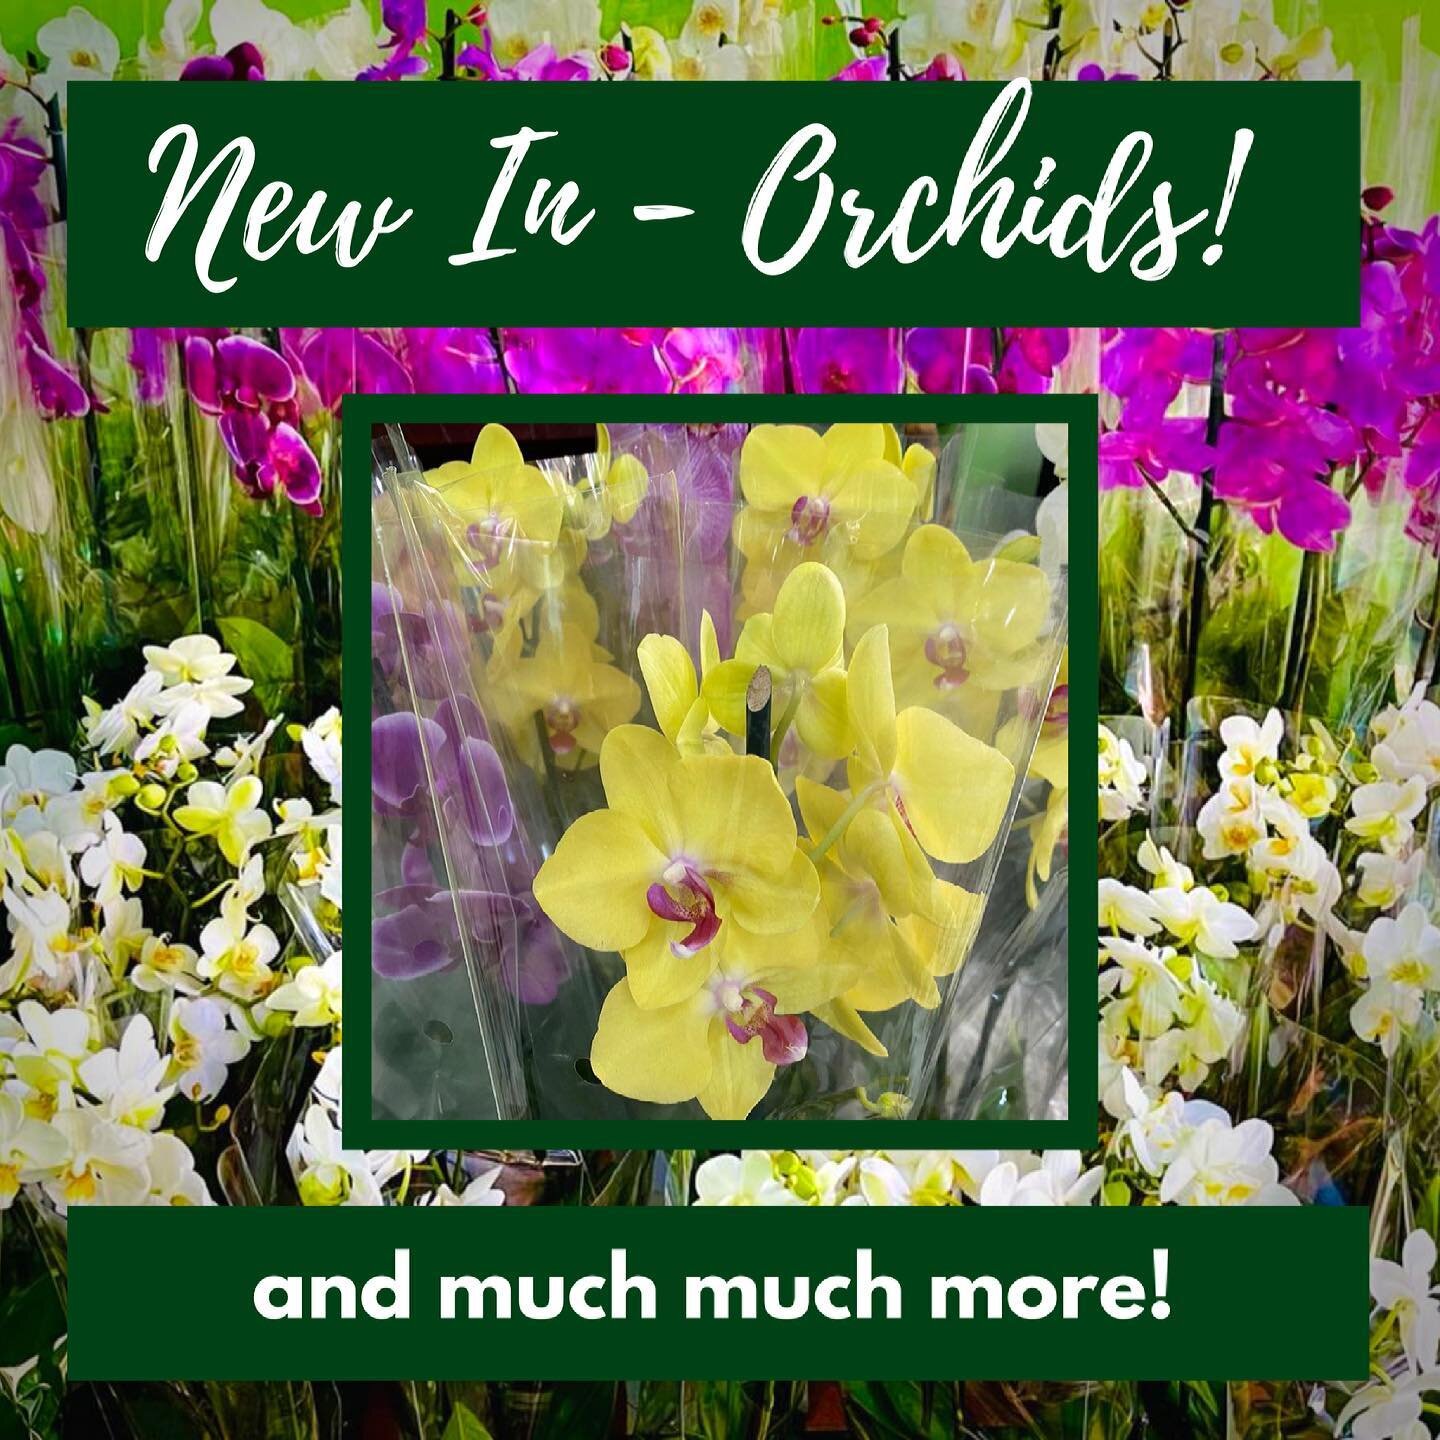 New in Orchids! We have a HUGE range of orchids in new and unique colour ways. Buy now before they&rsquo;re gone! 📞 Call / WhatsApp us now for enquiries 

Prices for orchids:

Orchids prices 
-phalaenopsis 1 stem 12cm K425
-phalaenopsis 2 stem 9cm m